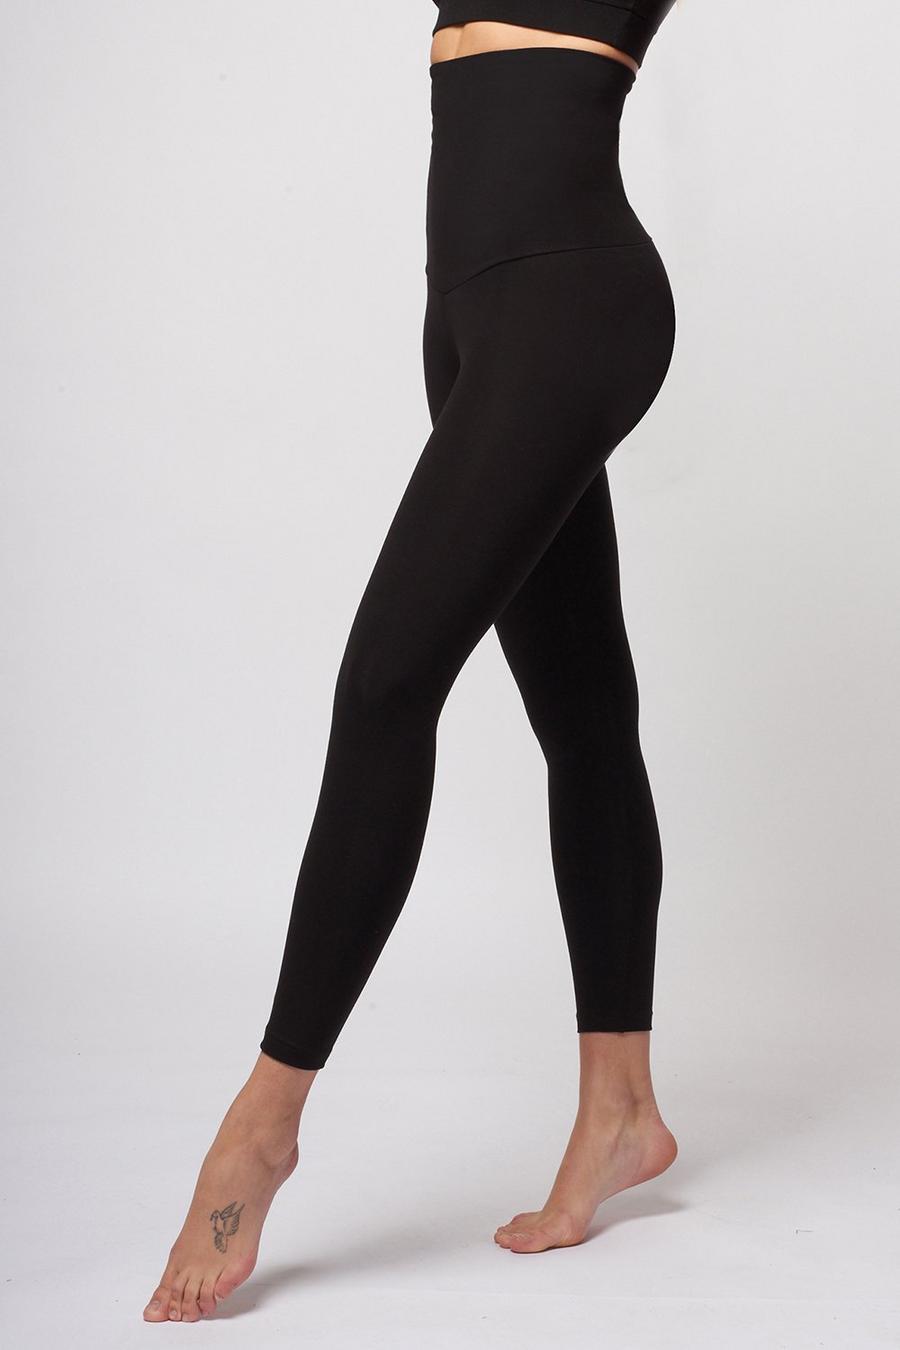 Black High Tummy Control Extra Strong Compression Leggings SHORT